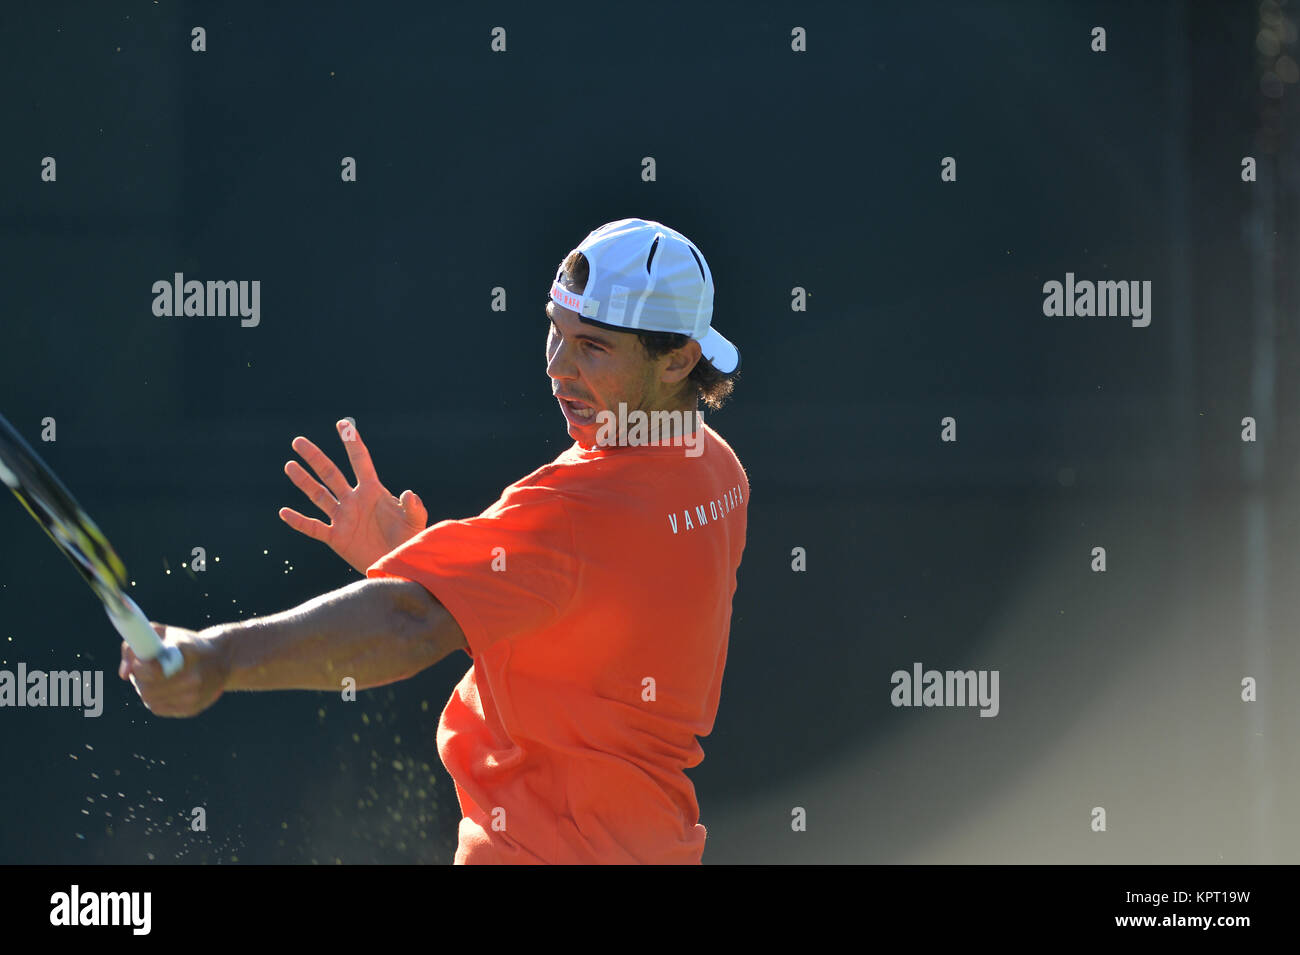 Page 3 - Rafael Nadal Nike High Resolution Stock Photography and Images -  Alamy